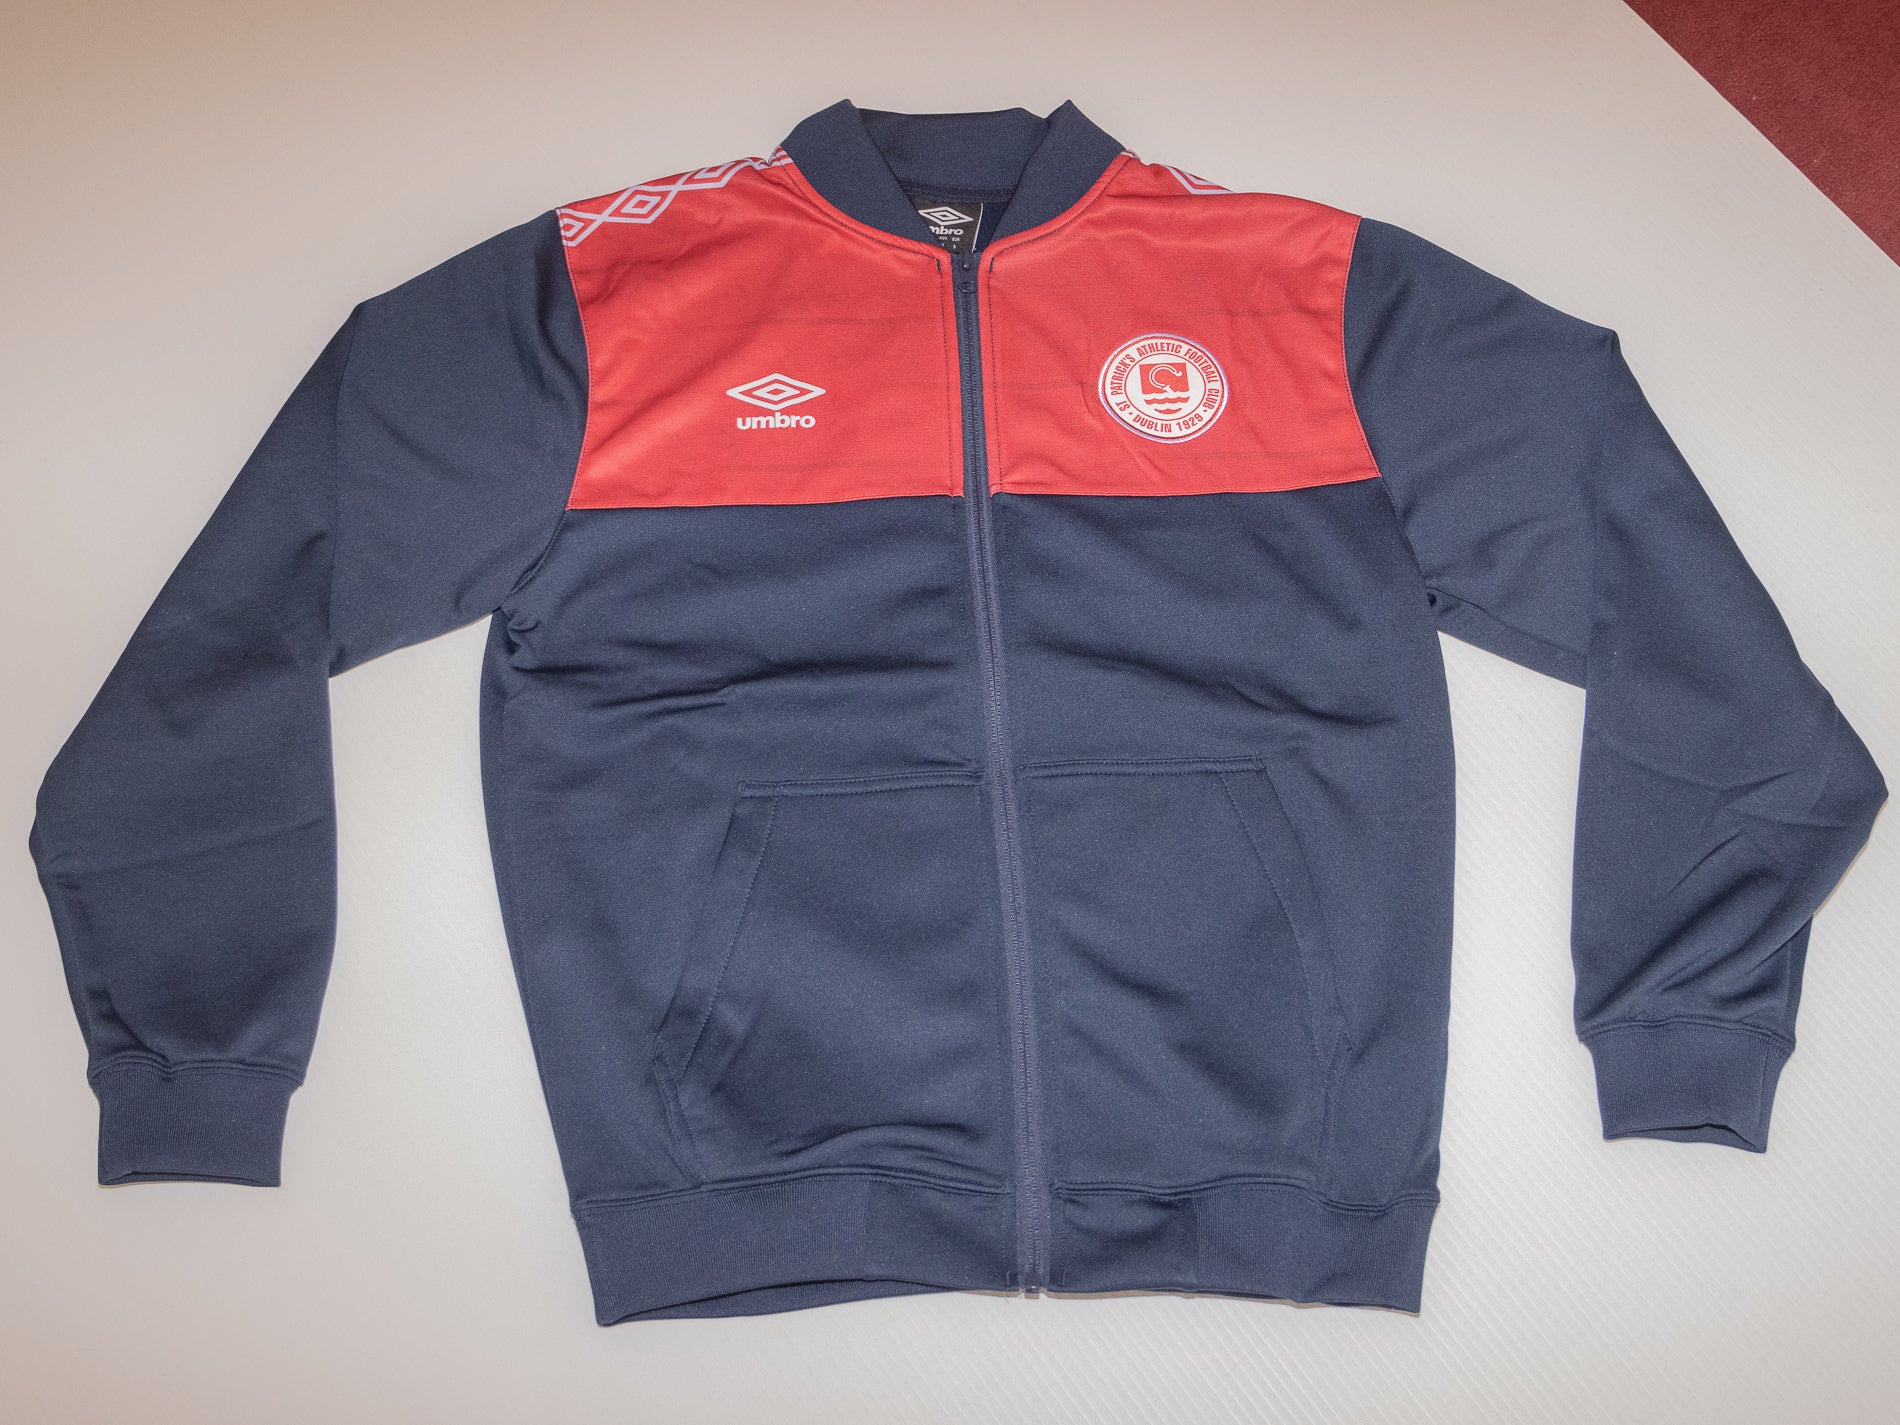 Home Walkout Jacket - Navy/Red - Youths - (2330)